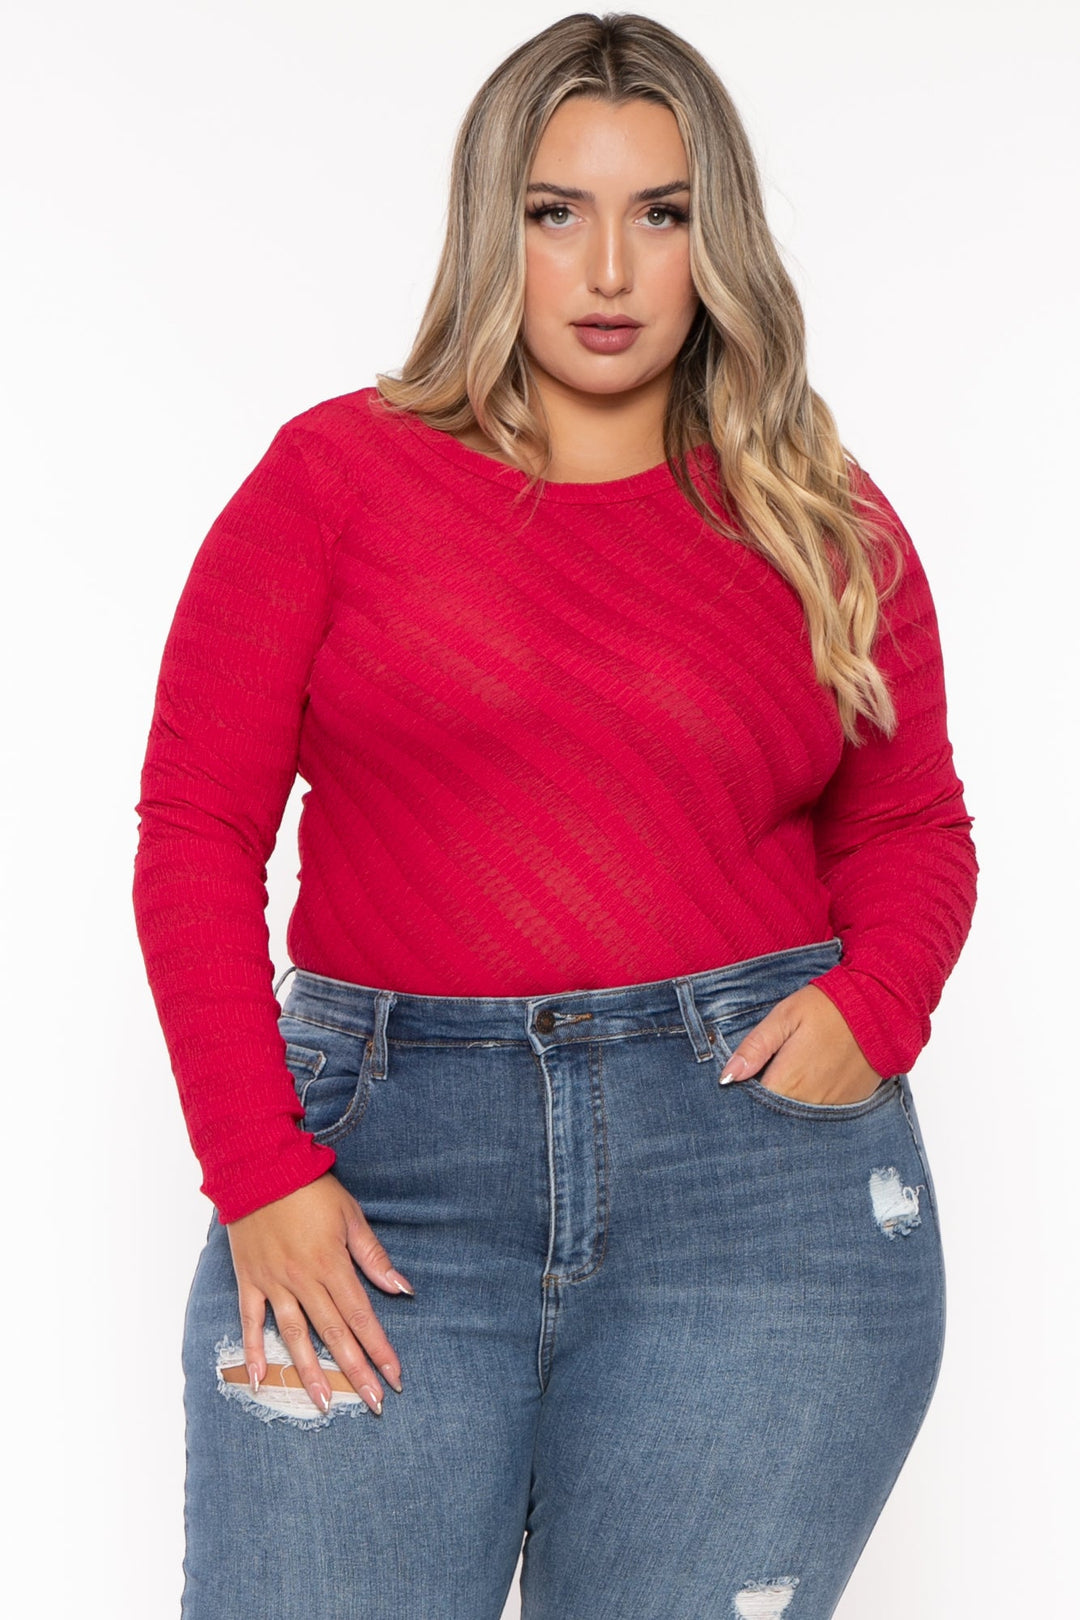 CULTURE CODE Tops 1X / Red Plus Size  Amina Crew Neck Bodysuit - Red